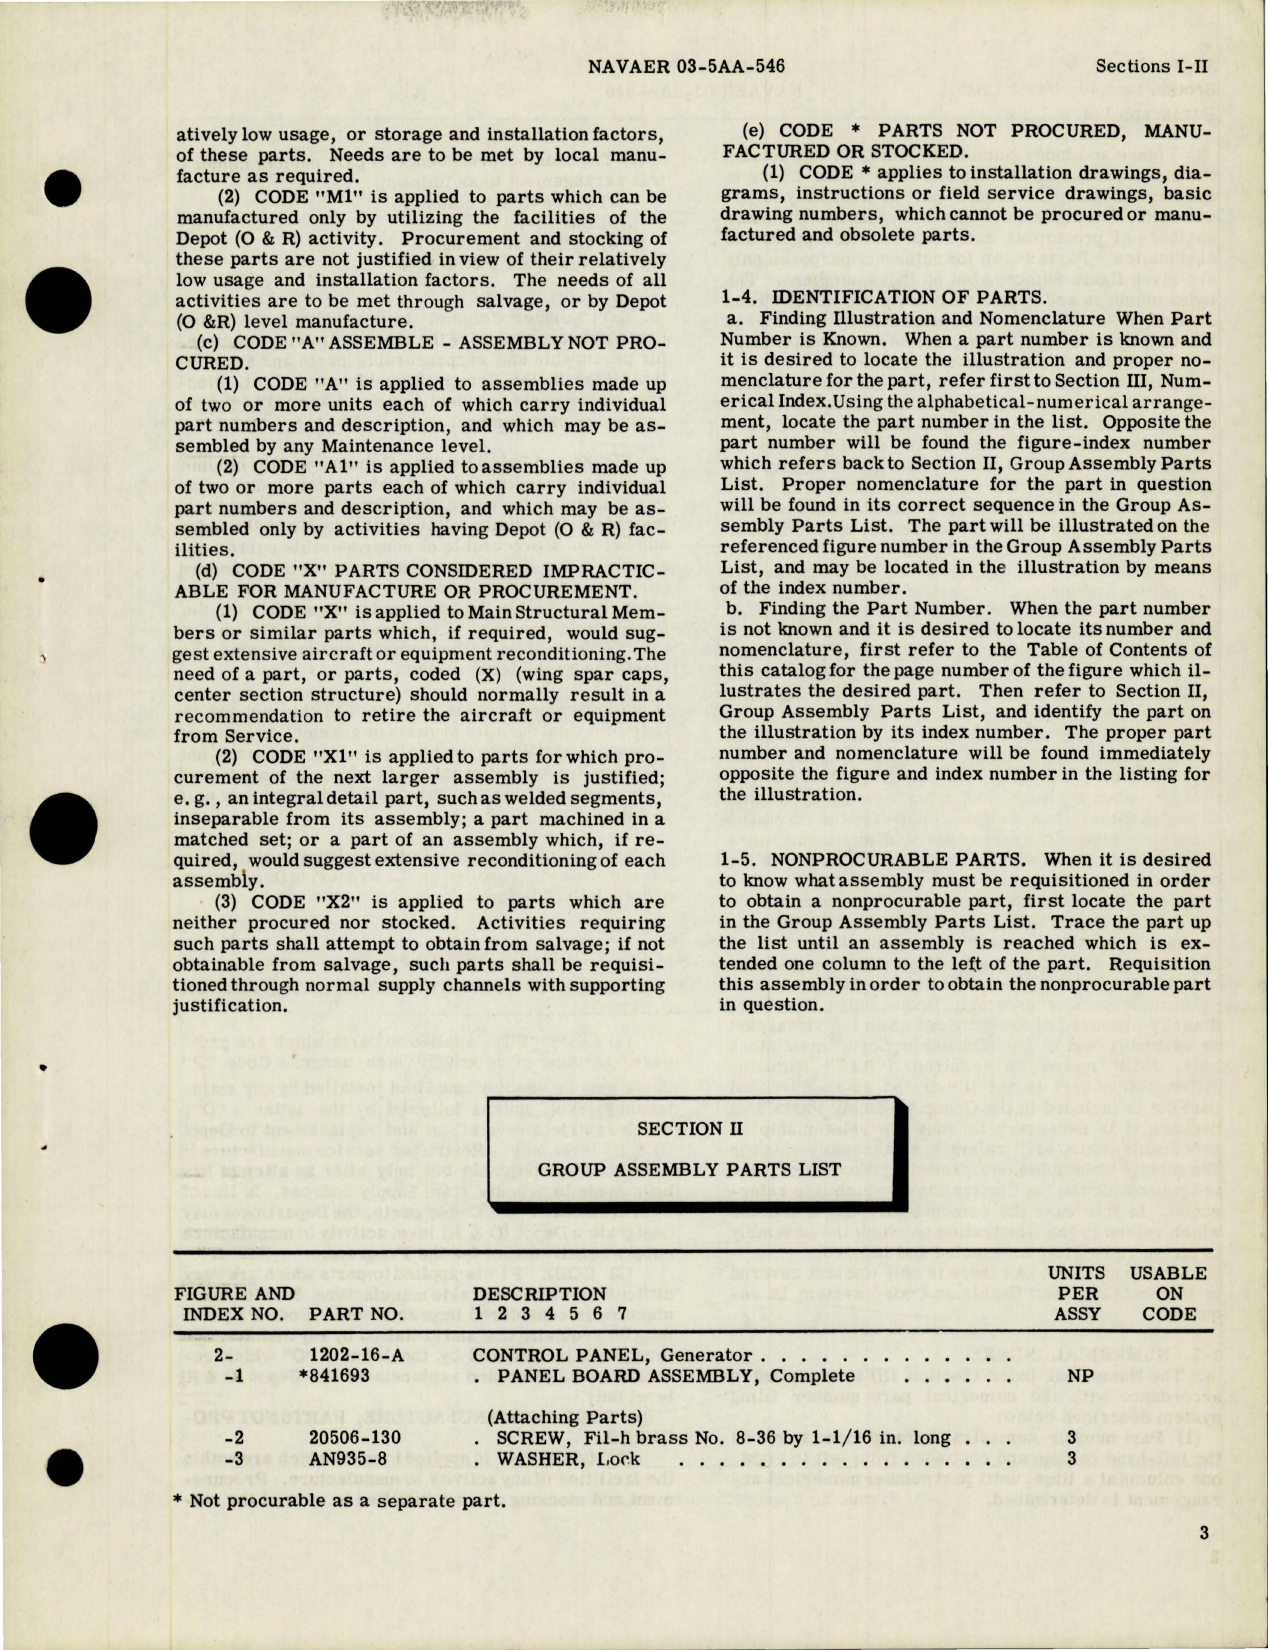 Sample page 5 from AirCorps Library document: Parts Catalog for Generator Control Panel - Type 1202-16-A 